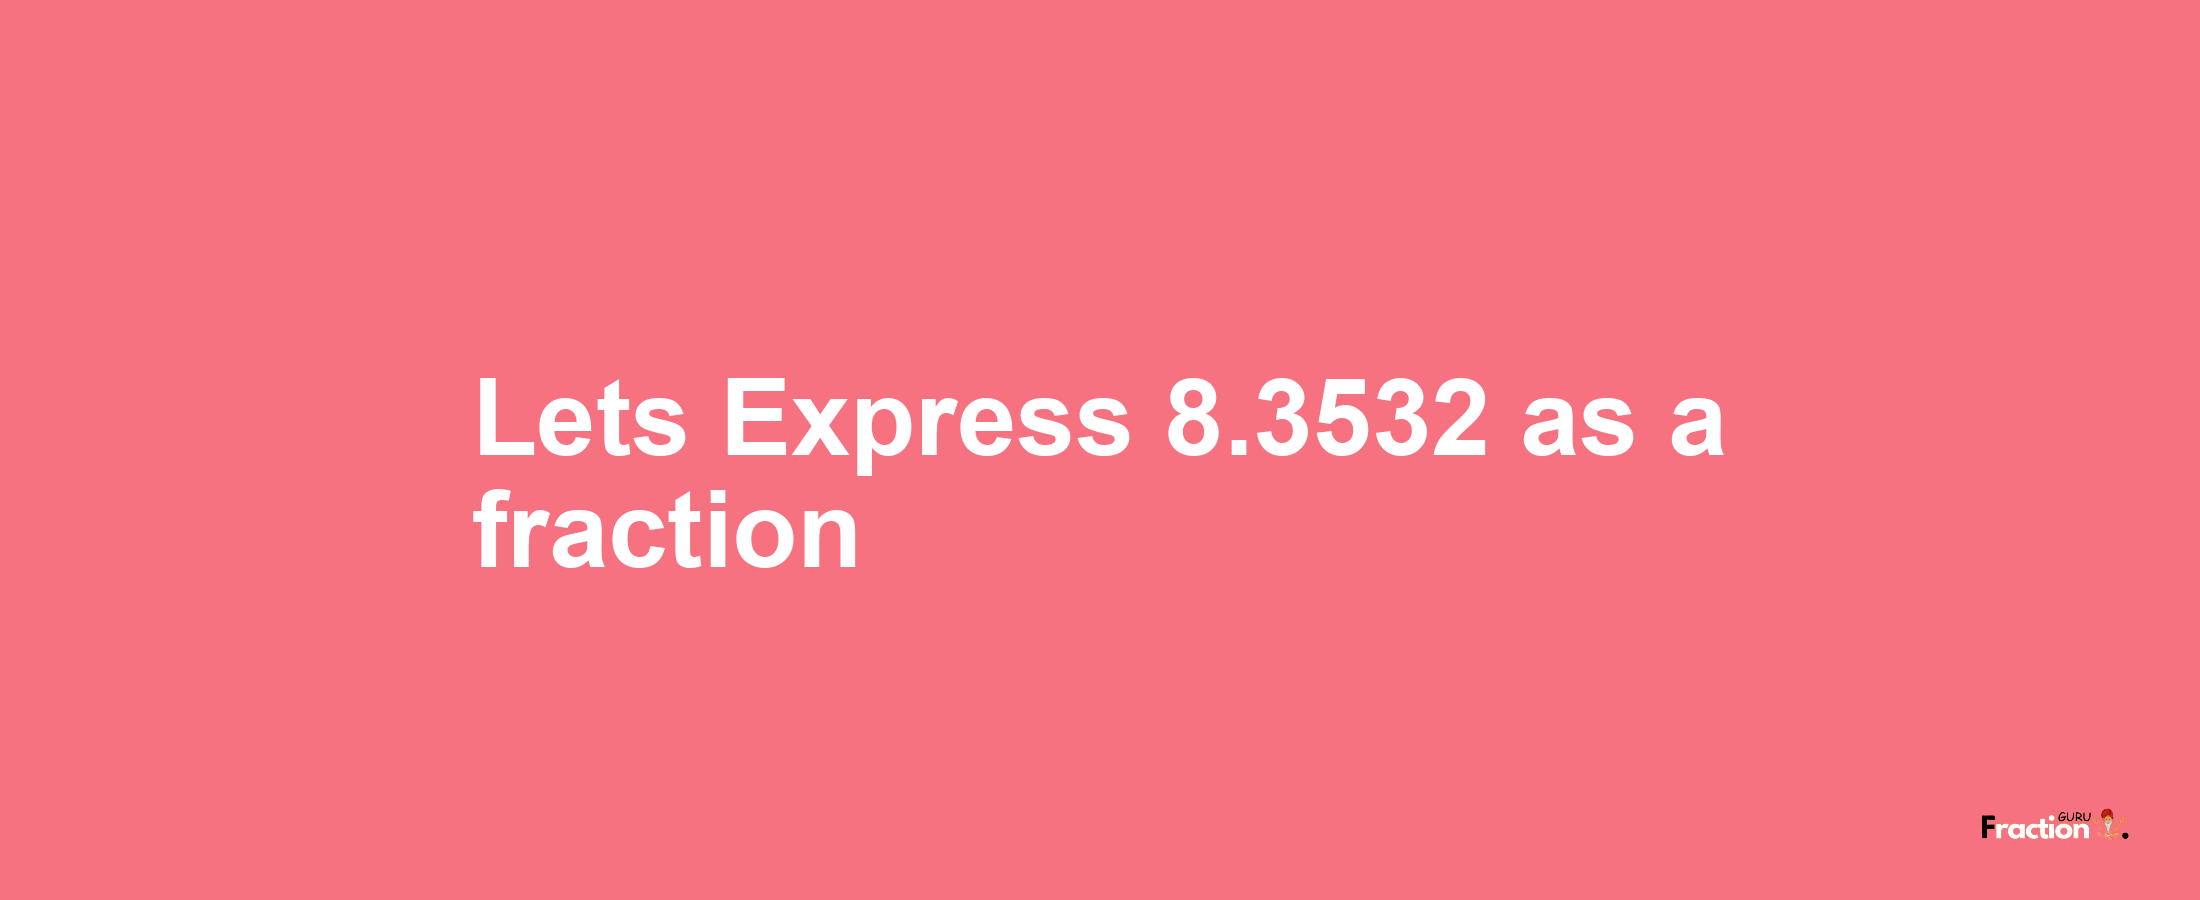 Lets Express 8.3532 as afraction